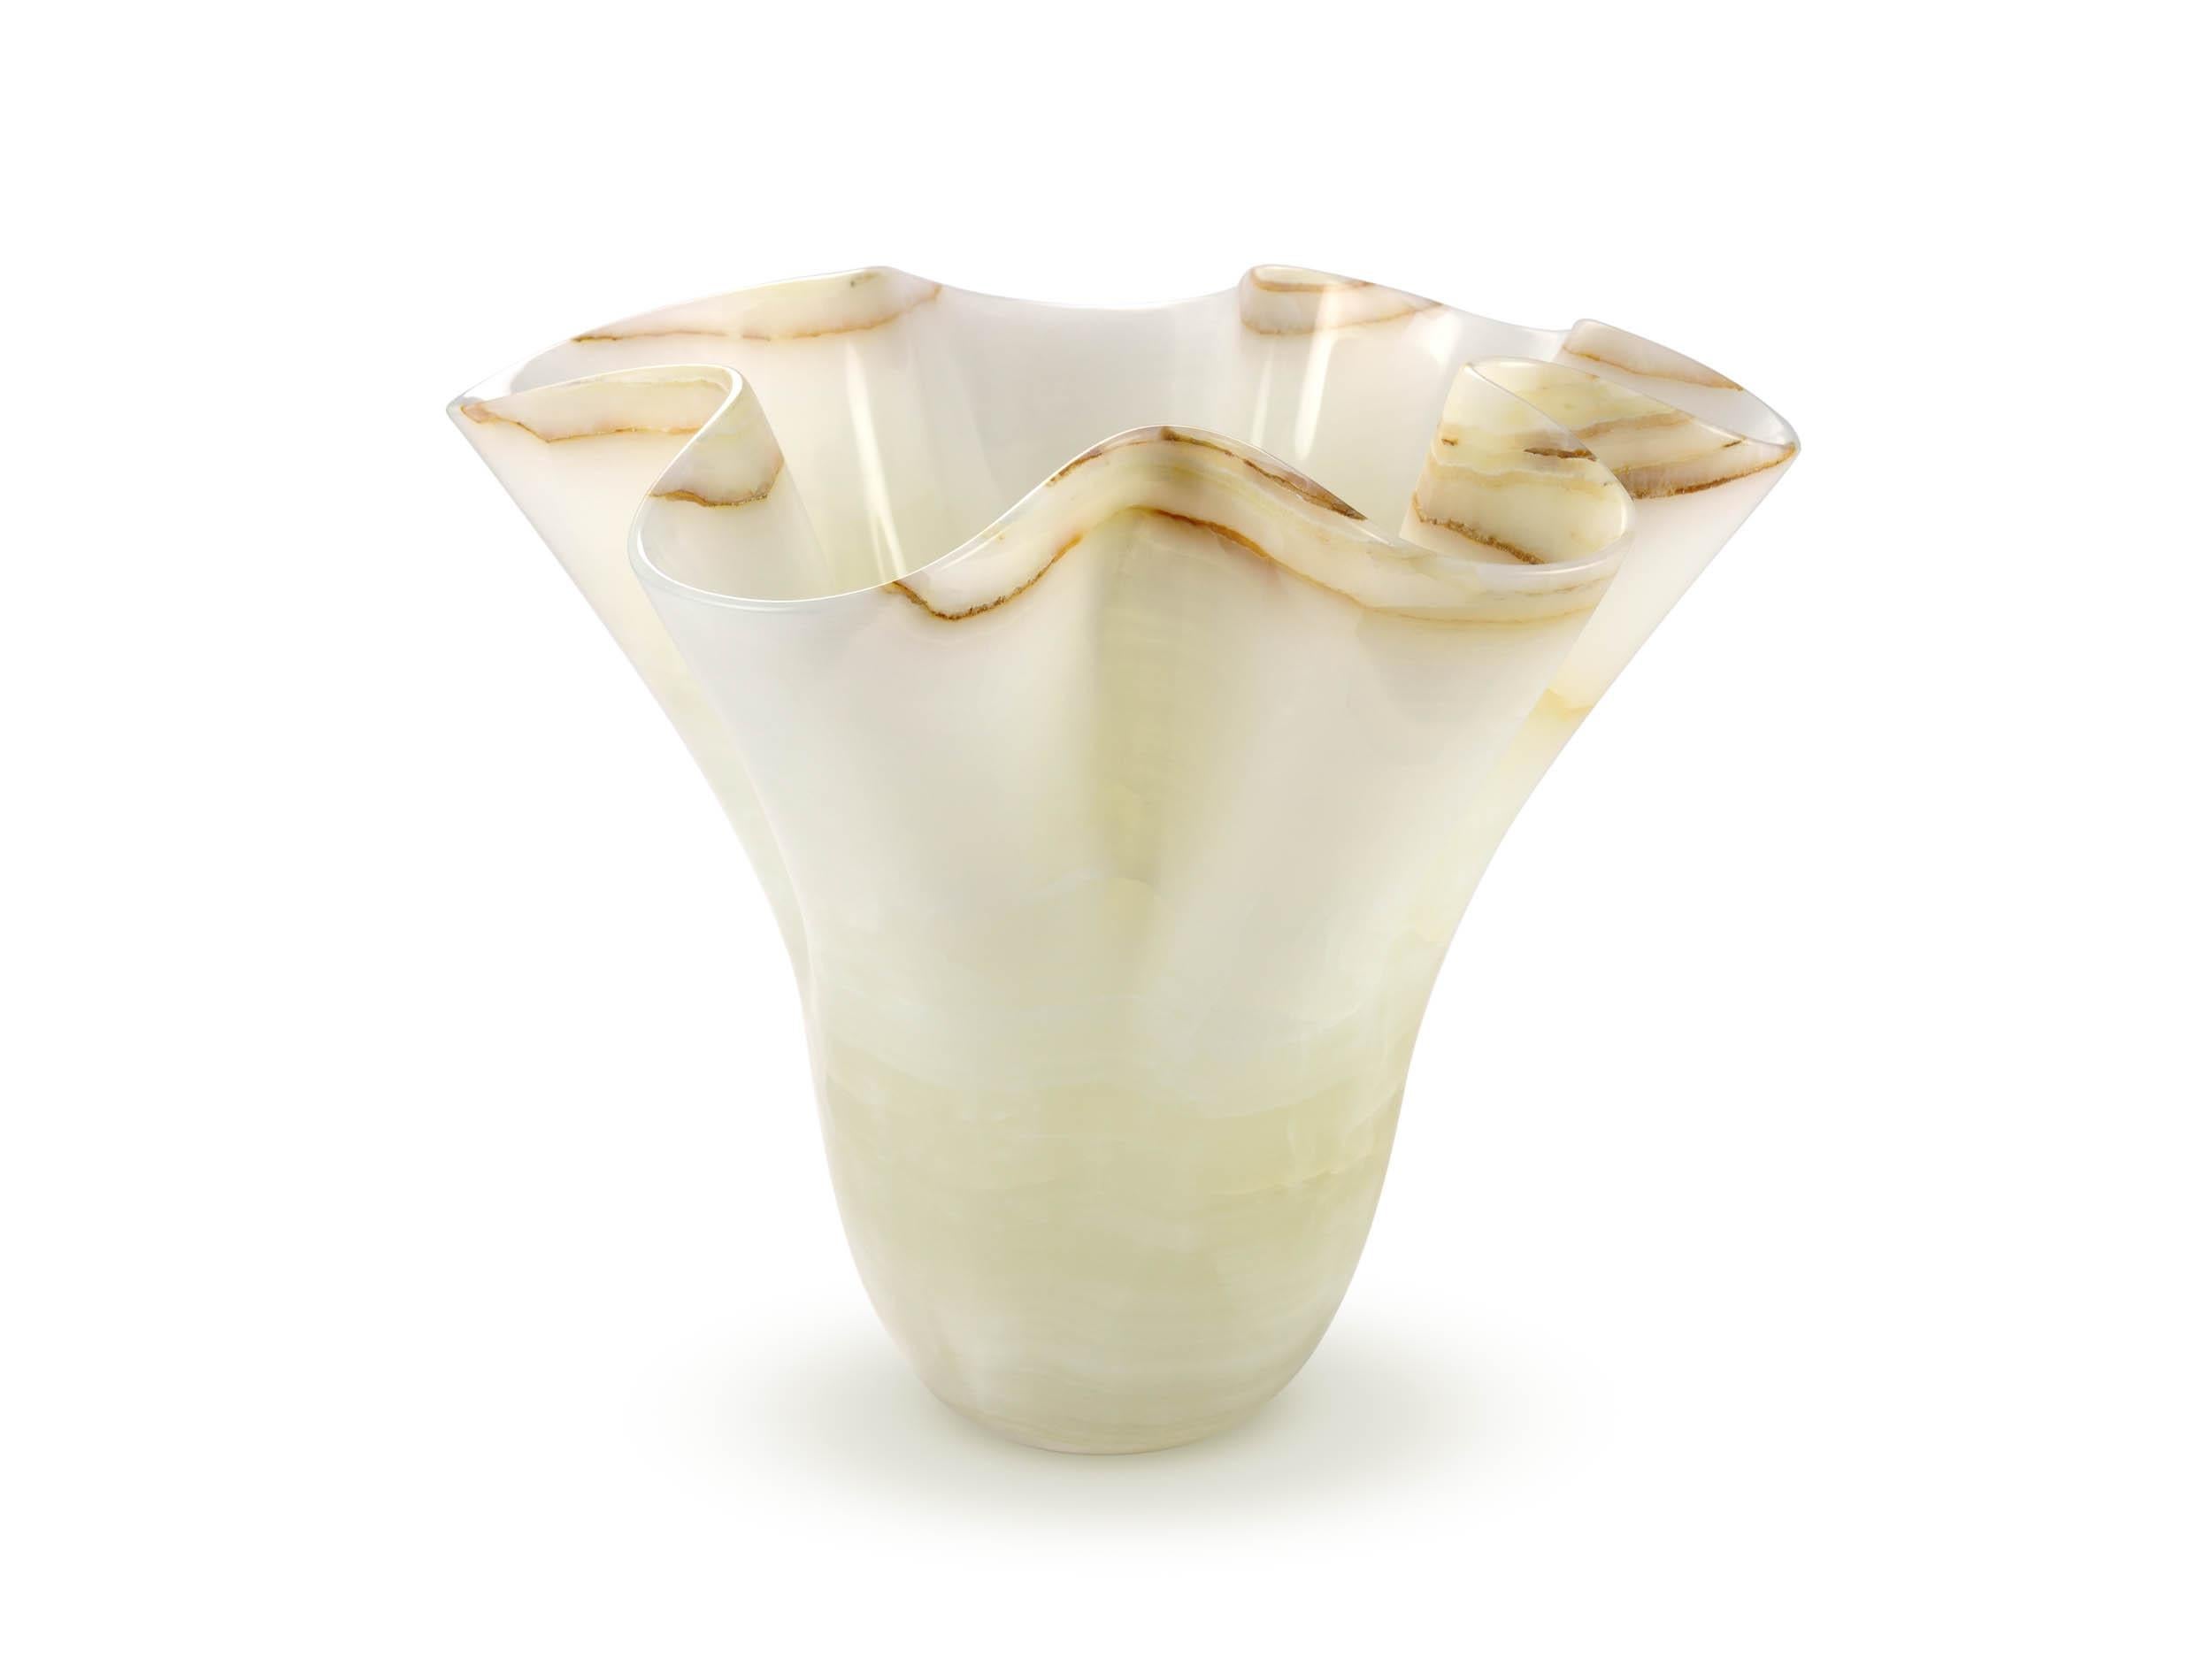 Important sculptural vase carved by hand from a solid block of pure white onyx. The vase is hand sculpted, starting from a large block of white onyx which has been carefully selected. The rarity of this material is given by both purity and